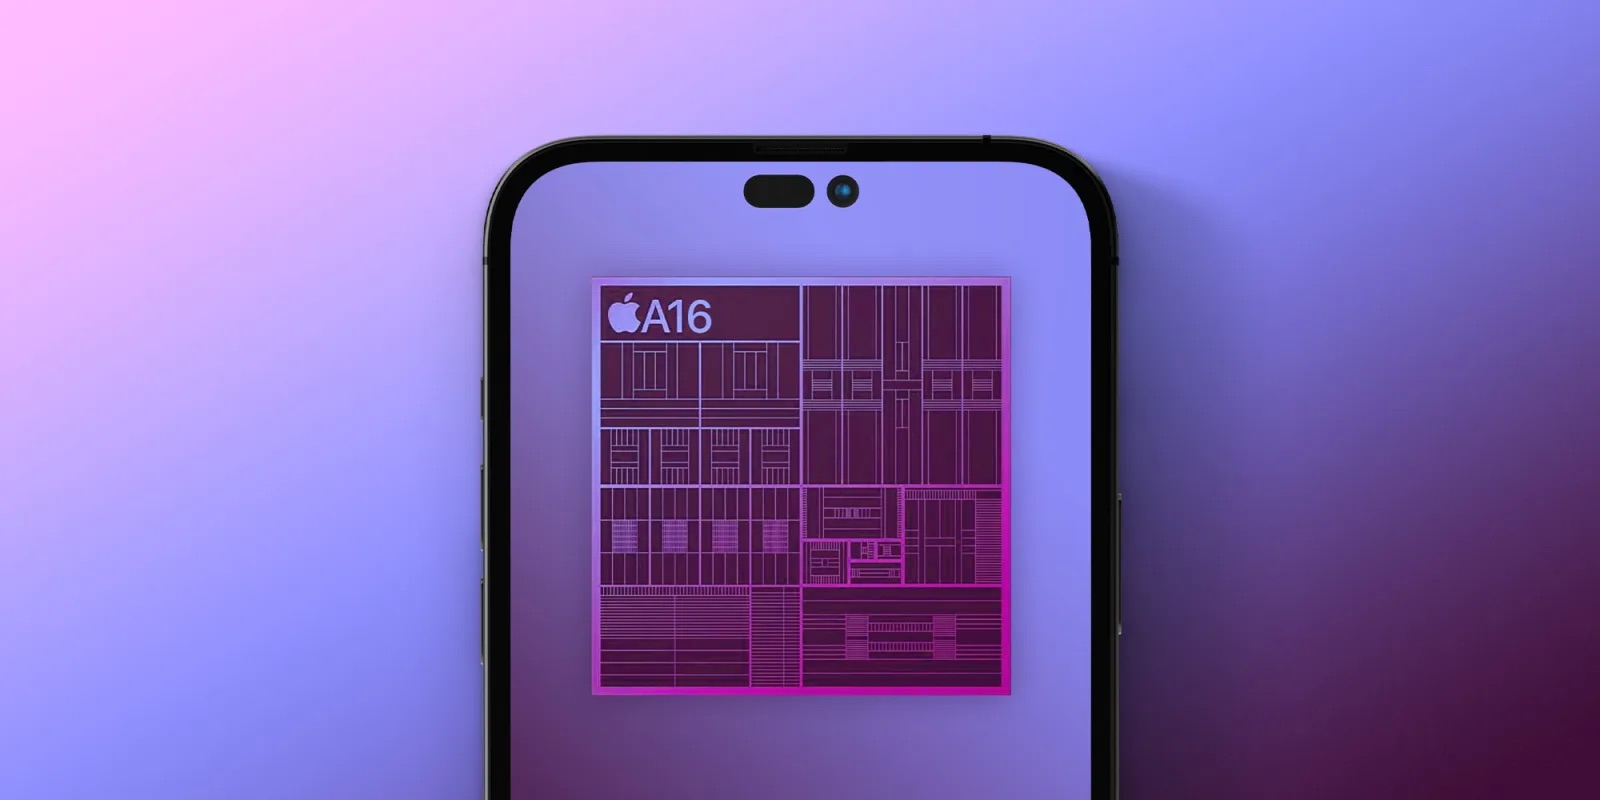 photo of A16 chip design means it’s really an A15+, argues Macworld image